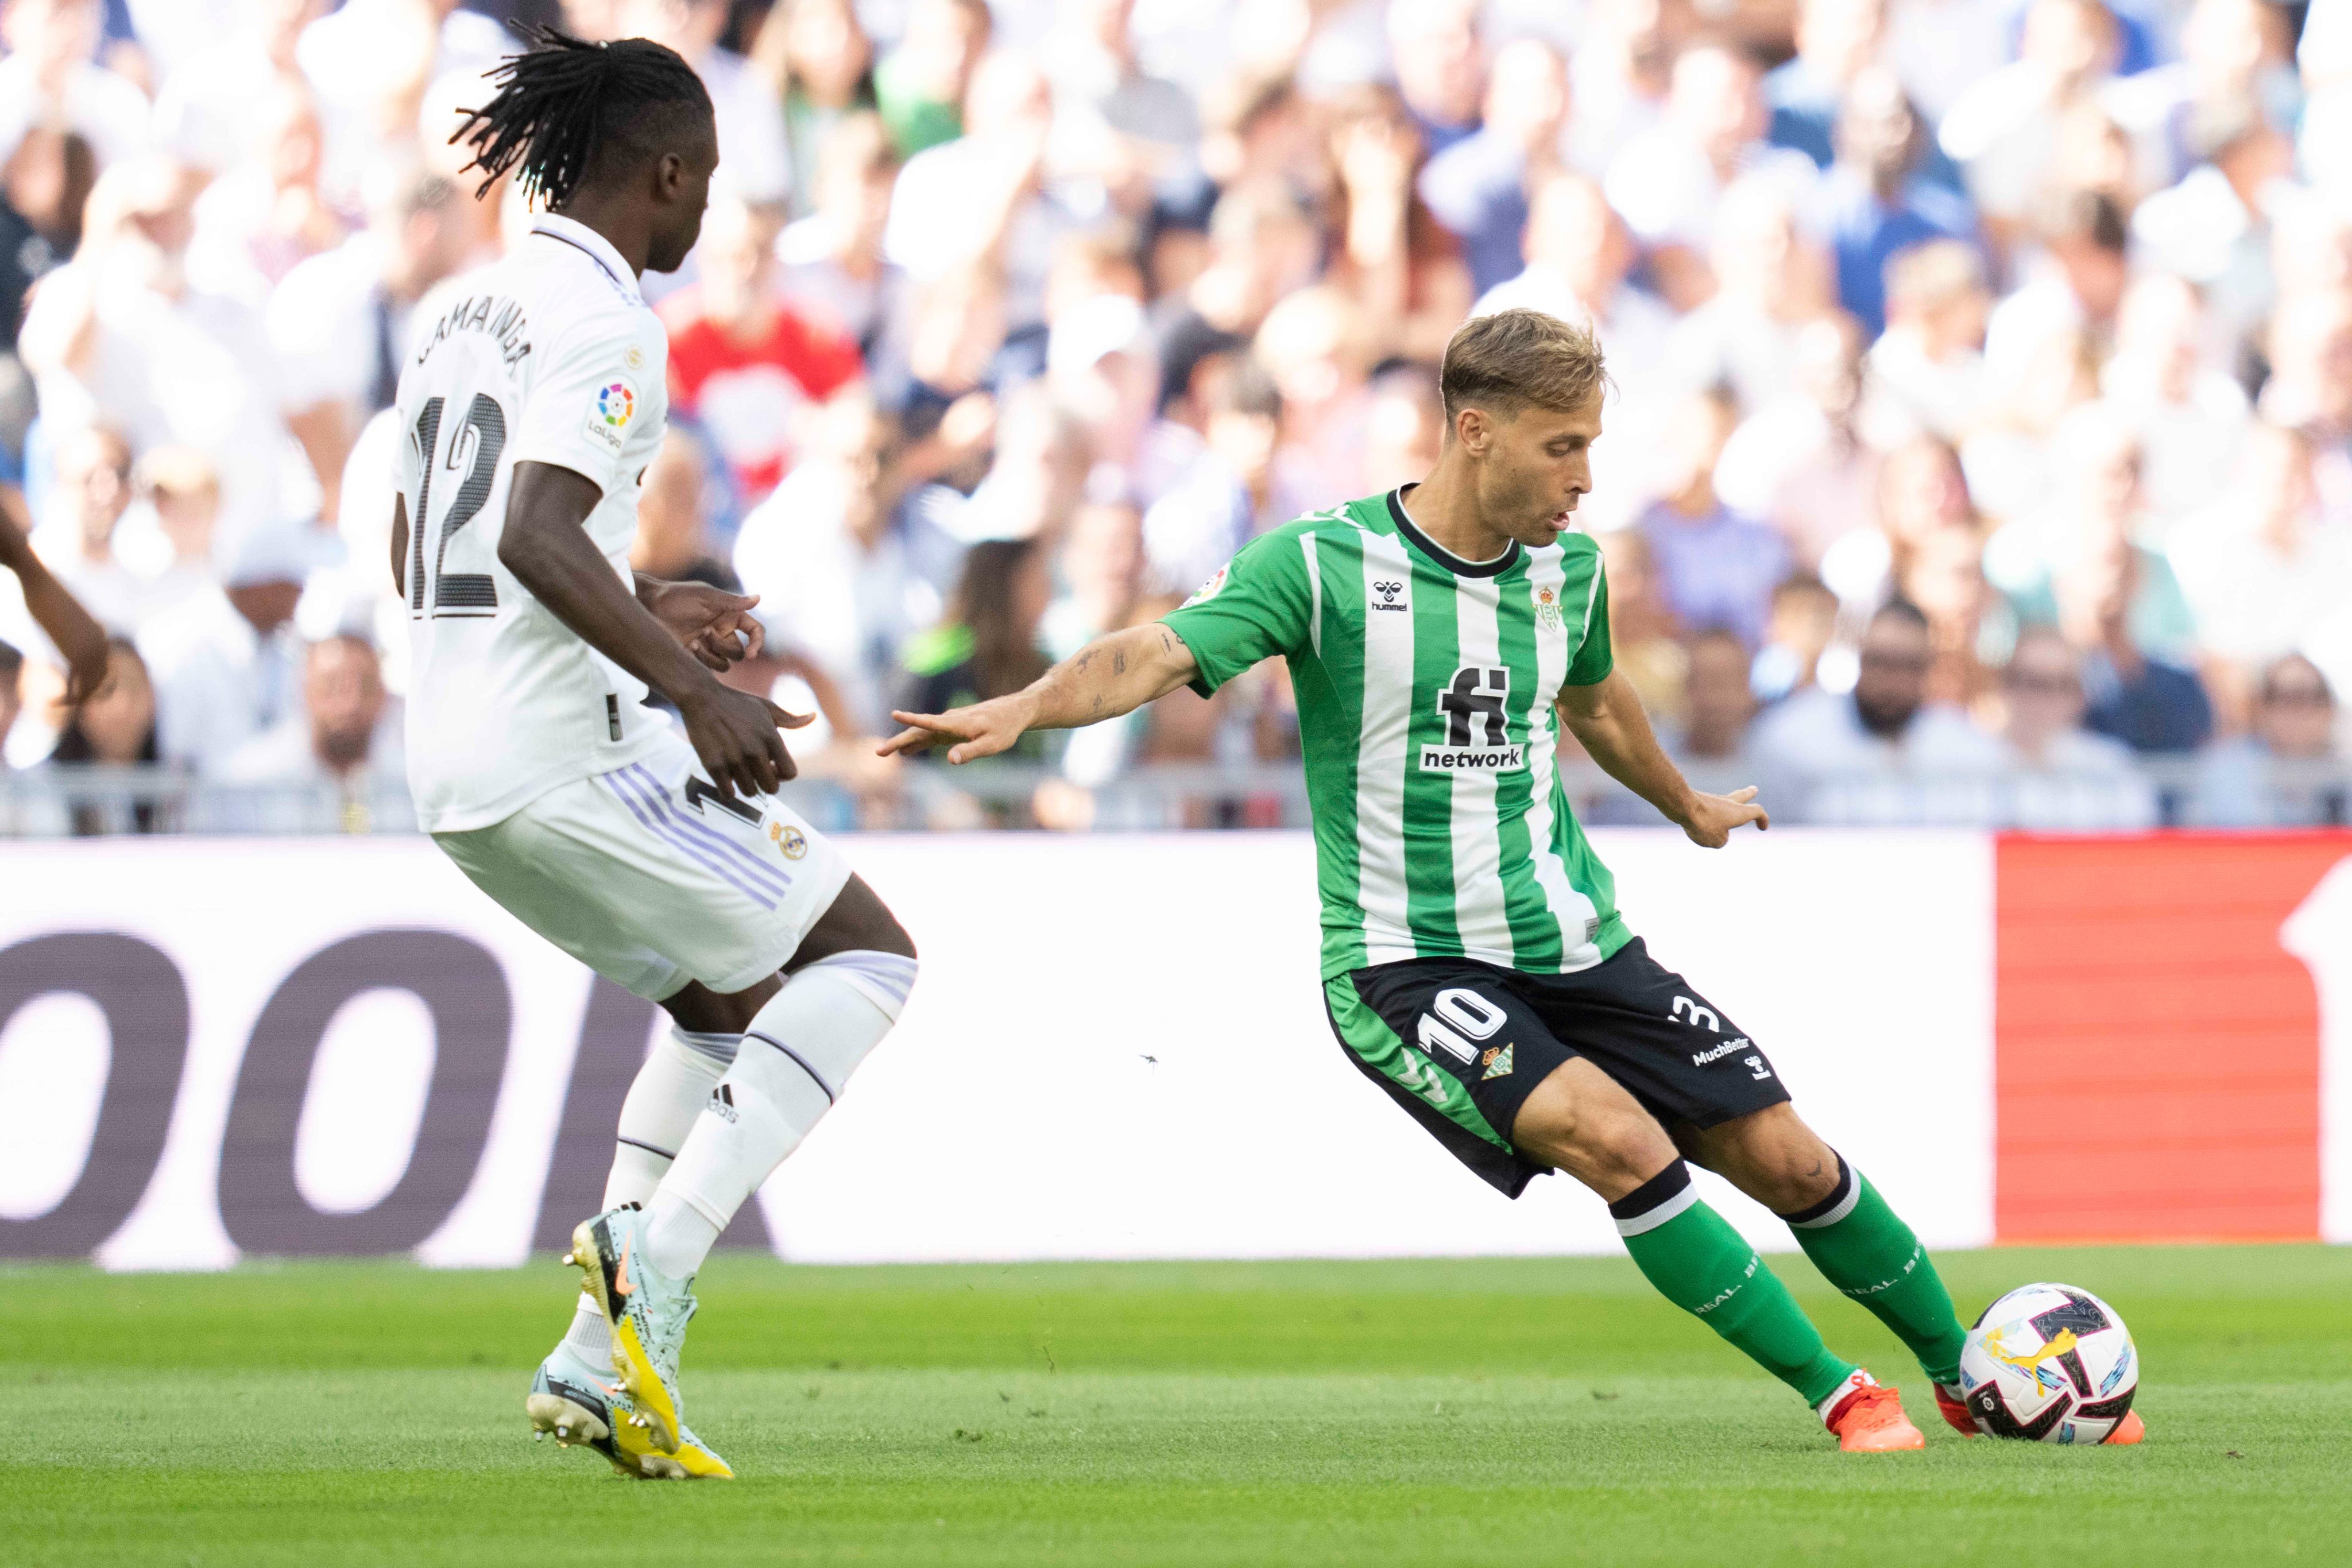 Sergio Canales scored for Real Betis against Real Madrid on Saturday